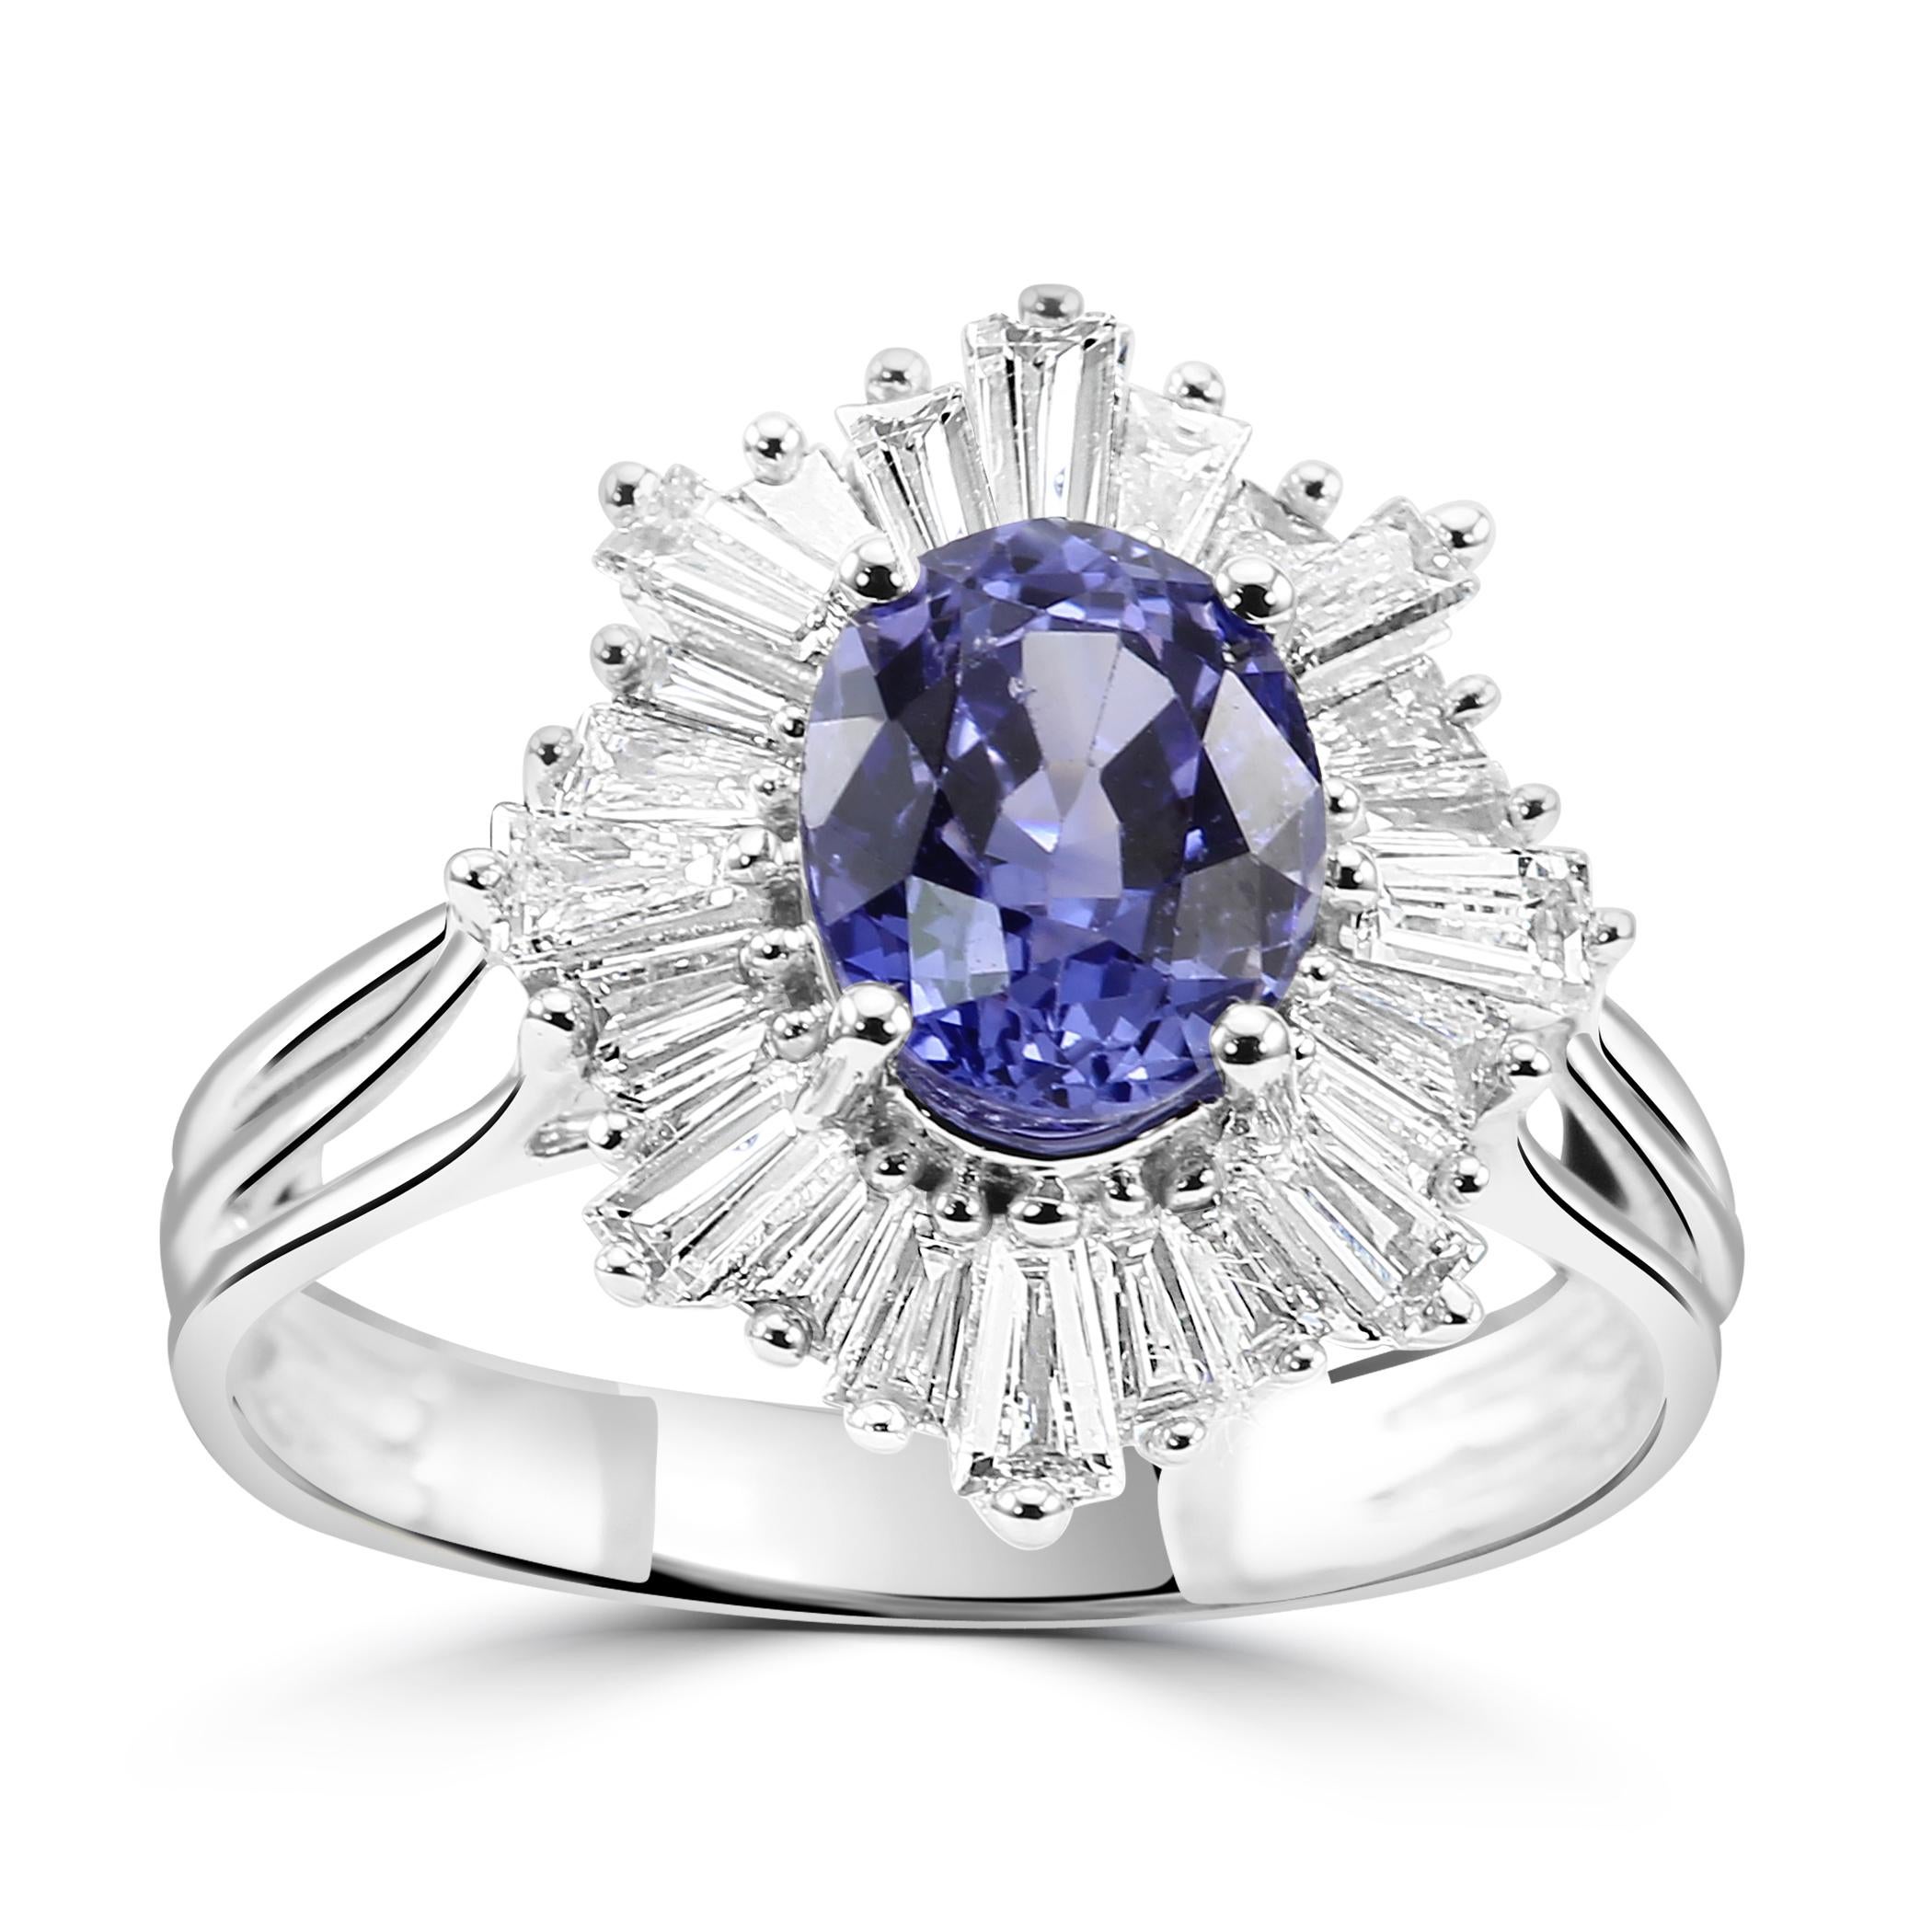 Introducing our Art Deco-inspired Ceylon Sapphire Ballerina Ring, a breathtaking piece that harmonizes vintage charm with contemporary elegance.

The star of this masterpiece is the Oval-Shaped Ceylon Sapphire, renowned for its deep blue hue and